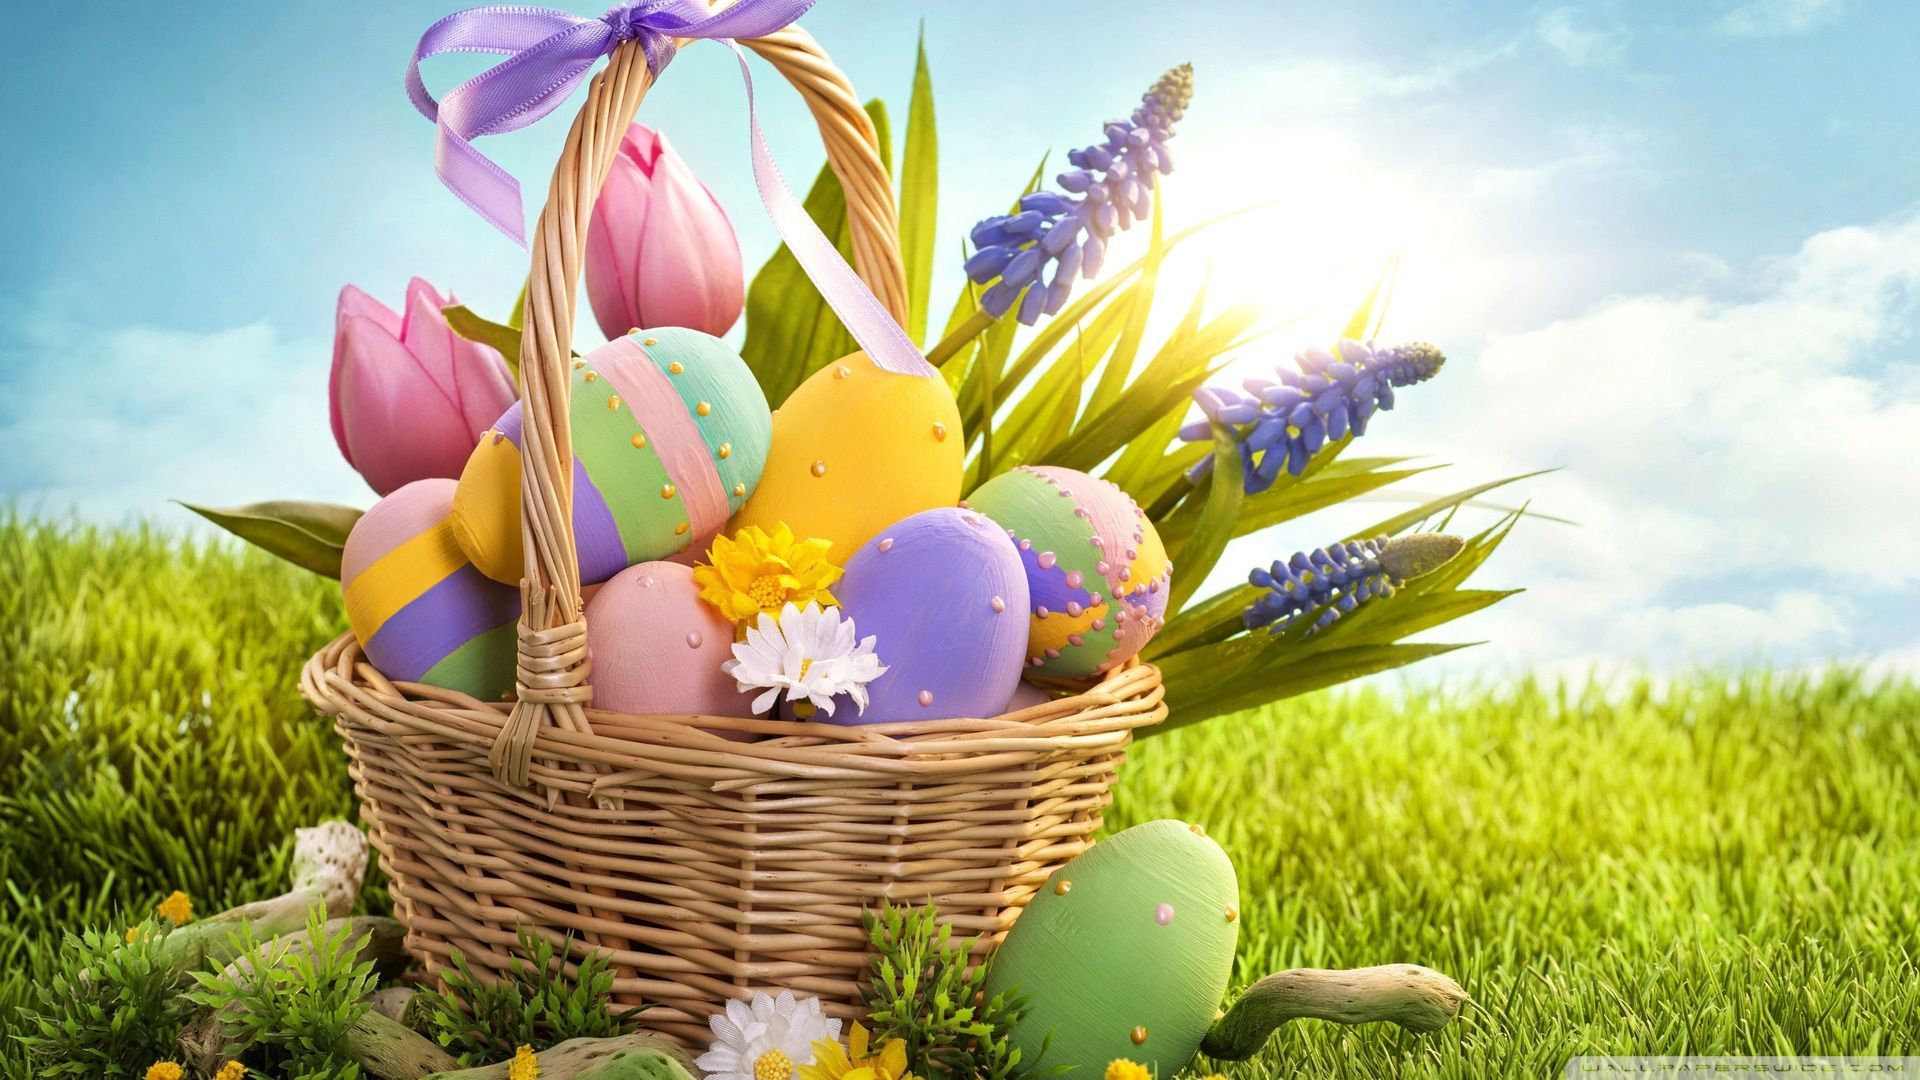 HD Easter Wallpaper. HD Background Image. Photo